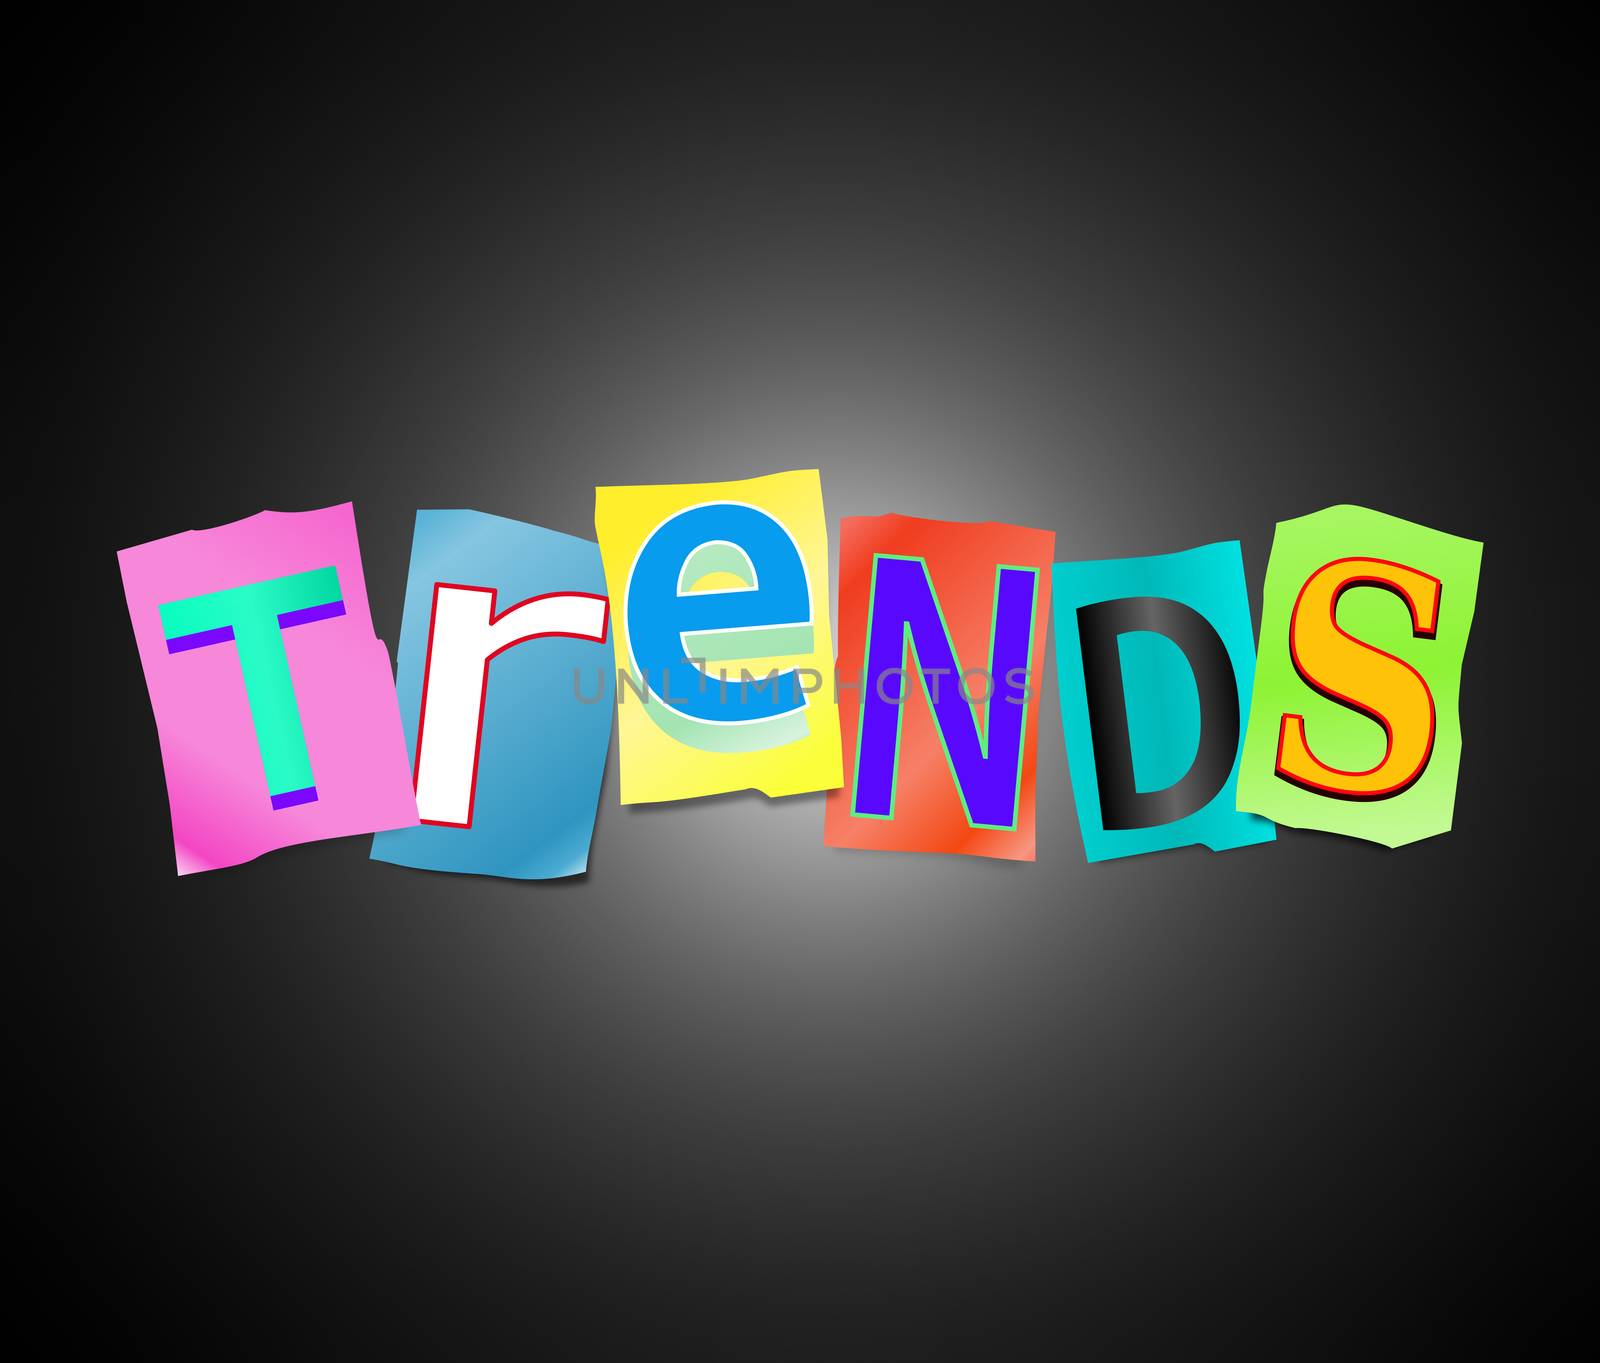 Illustration depicting a set of cut out printed letters arranged to form the word trends.